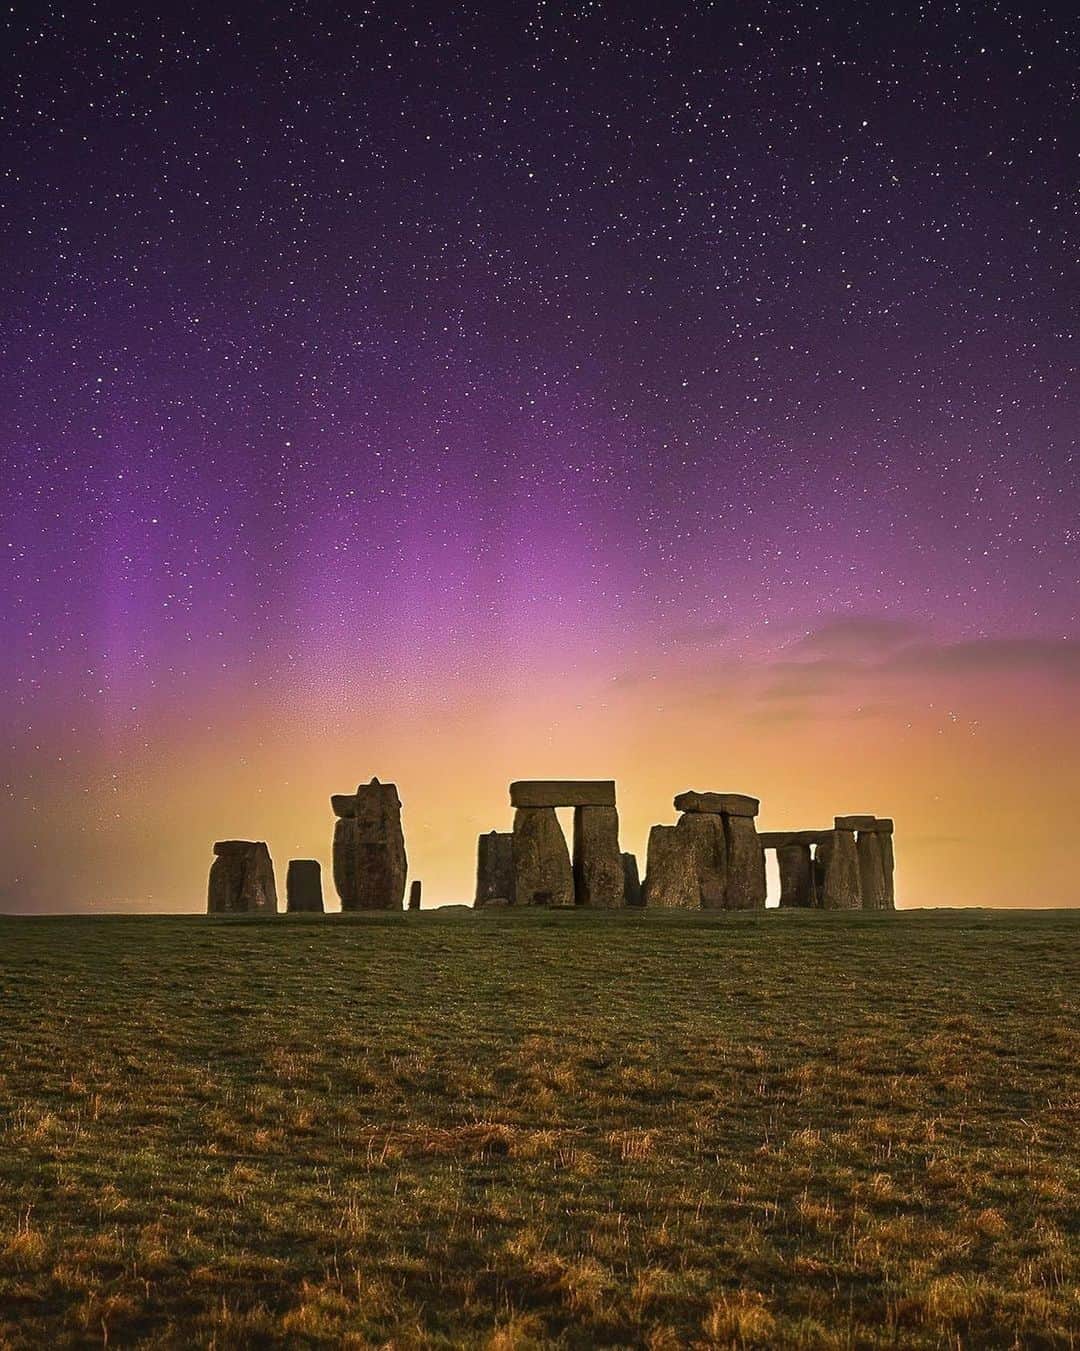 Discover Earthのインスタグラム：「Lost in time beneath the captivating Stonehenge arches at golden hour ✨  📍England  🏴󠁧󠁢󠁥󠁮󠁧󠁿 #DiscoverEngland with @evansabovephotography」